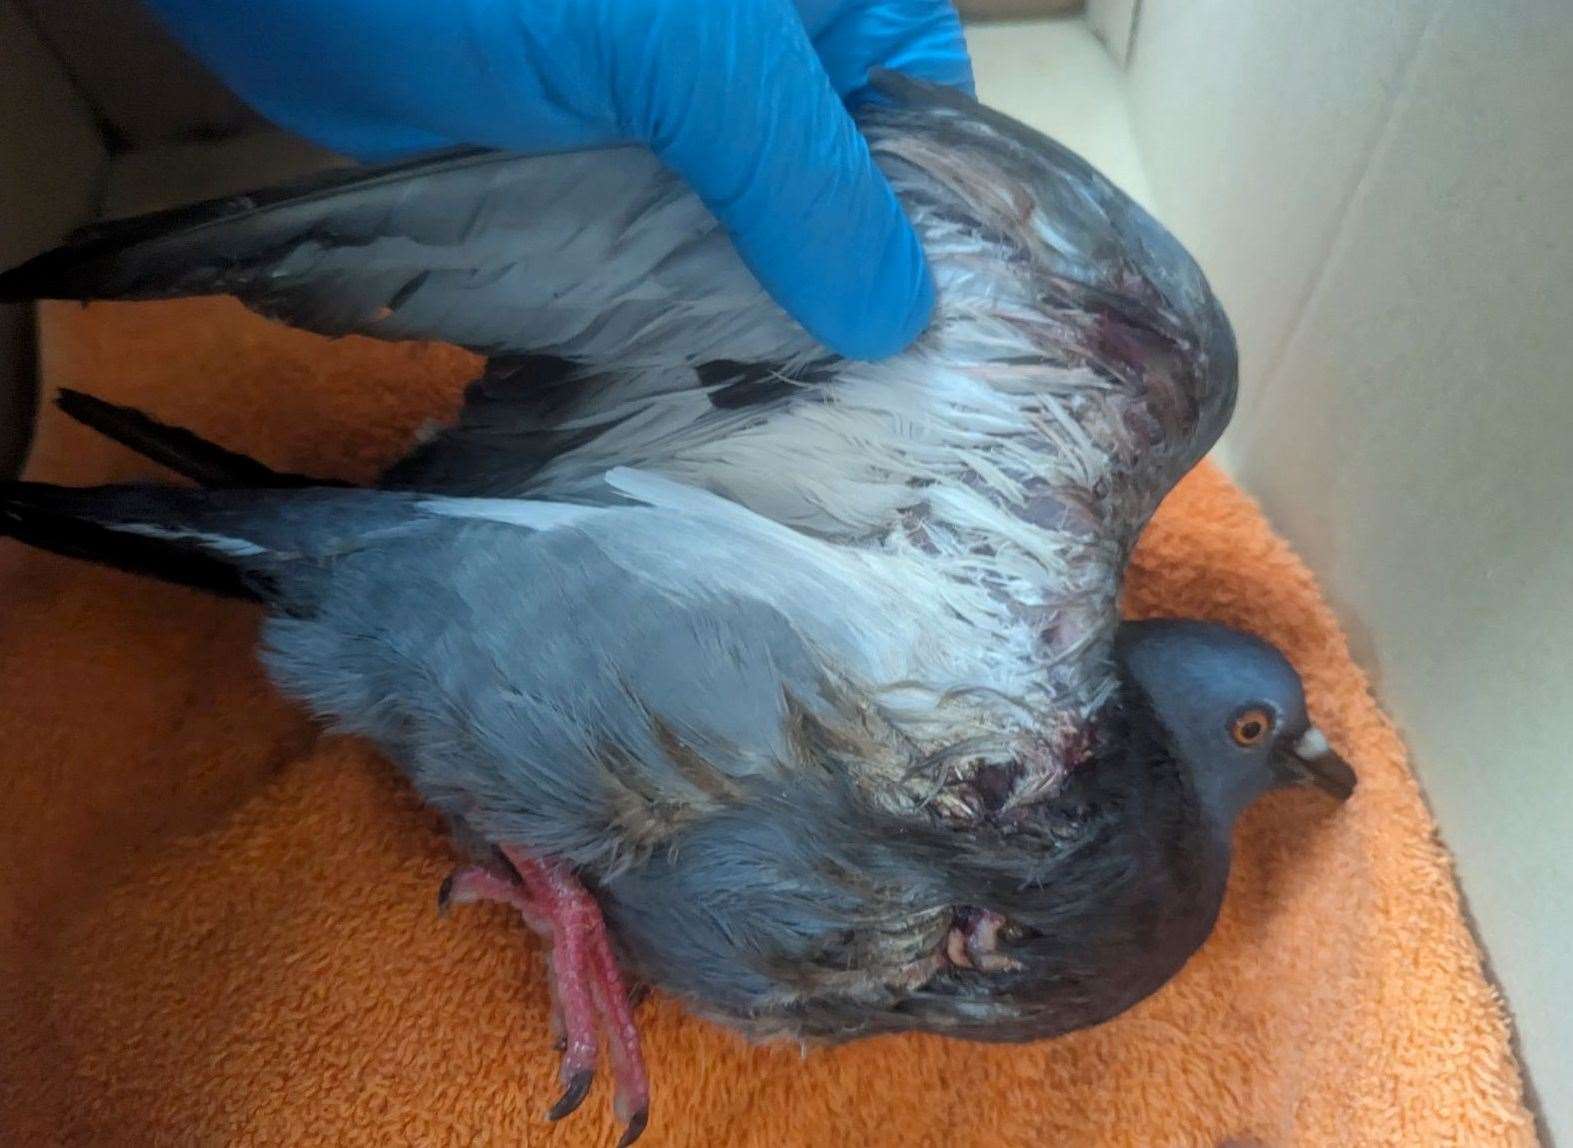 The injured pigeon after the catapult attacks in Mote Park. Picture: RSPCA